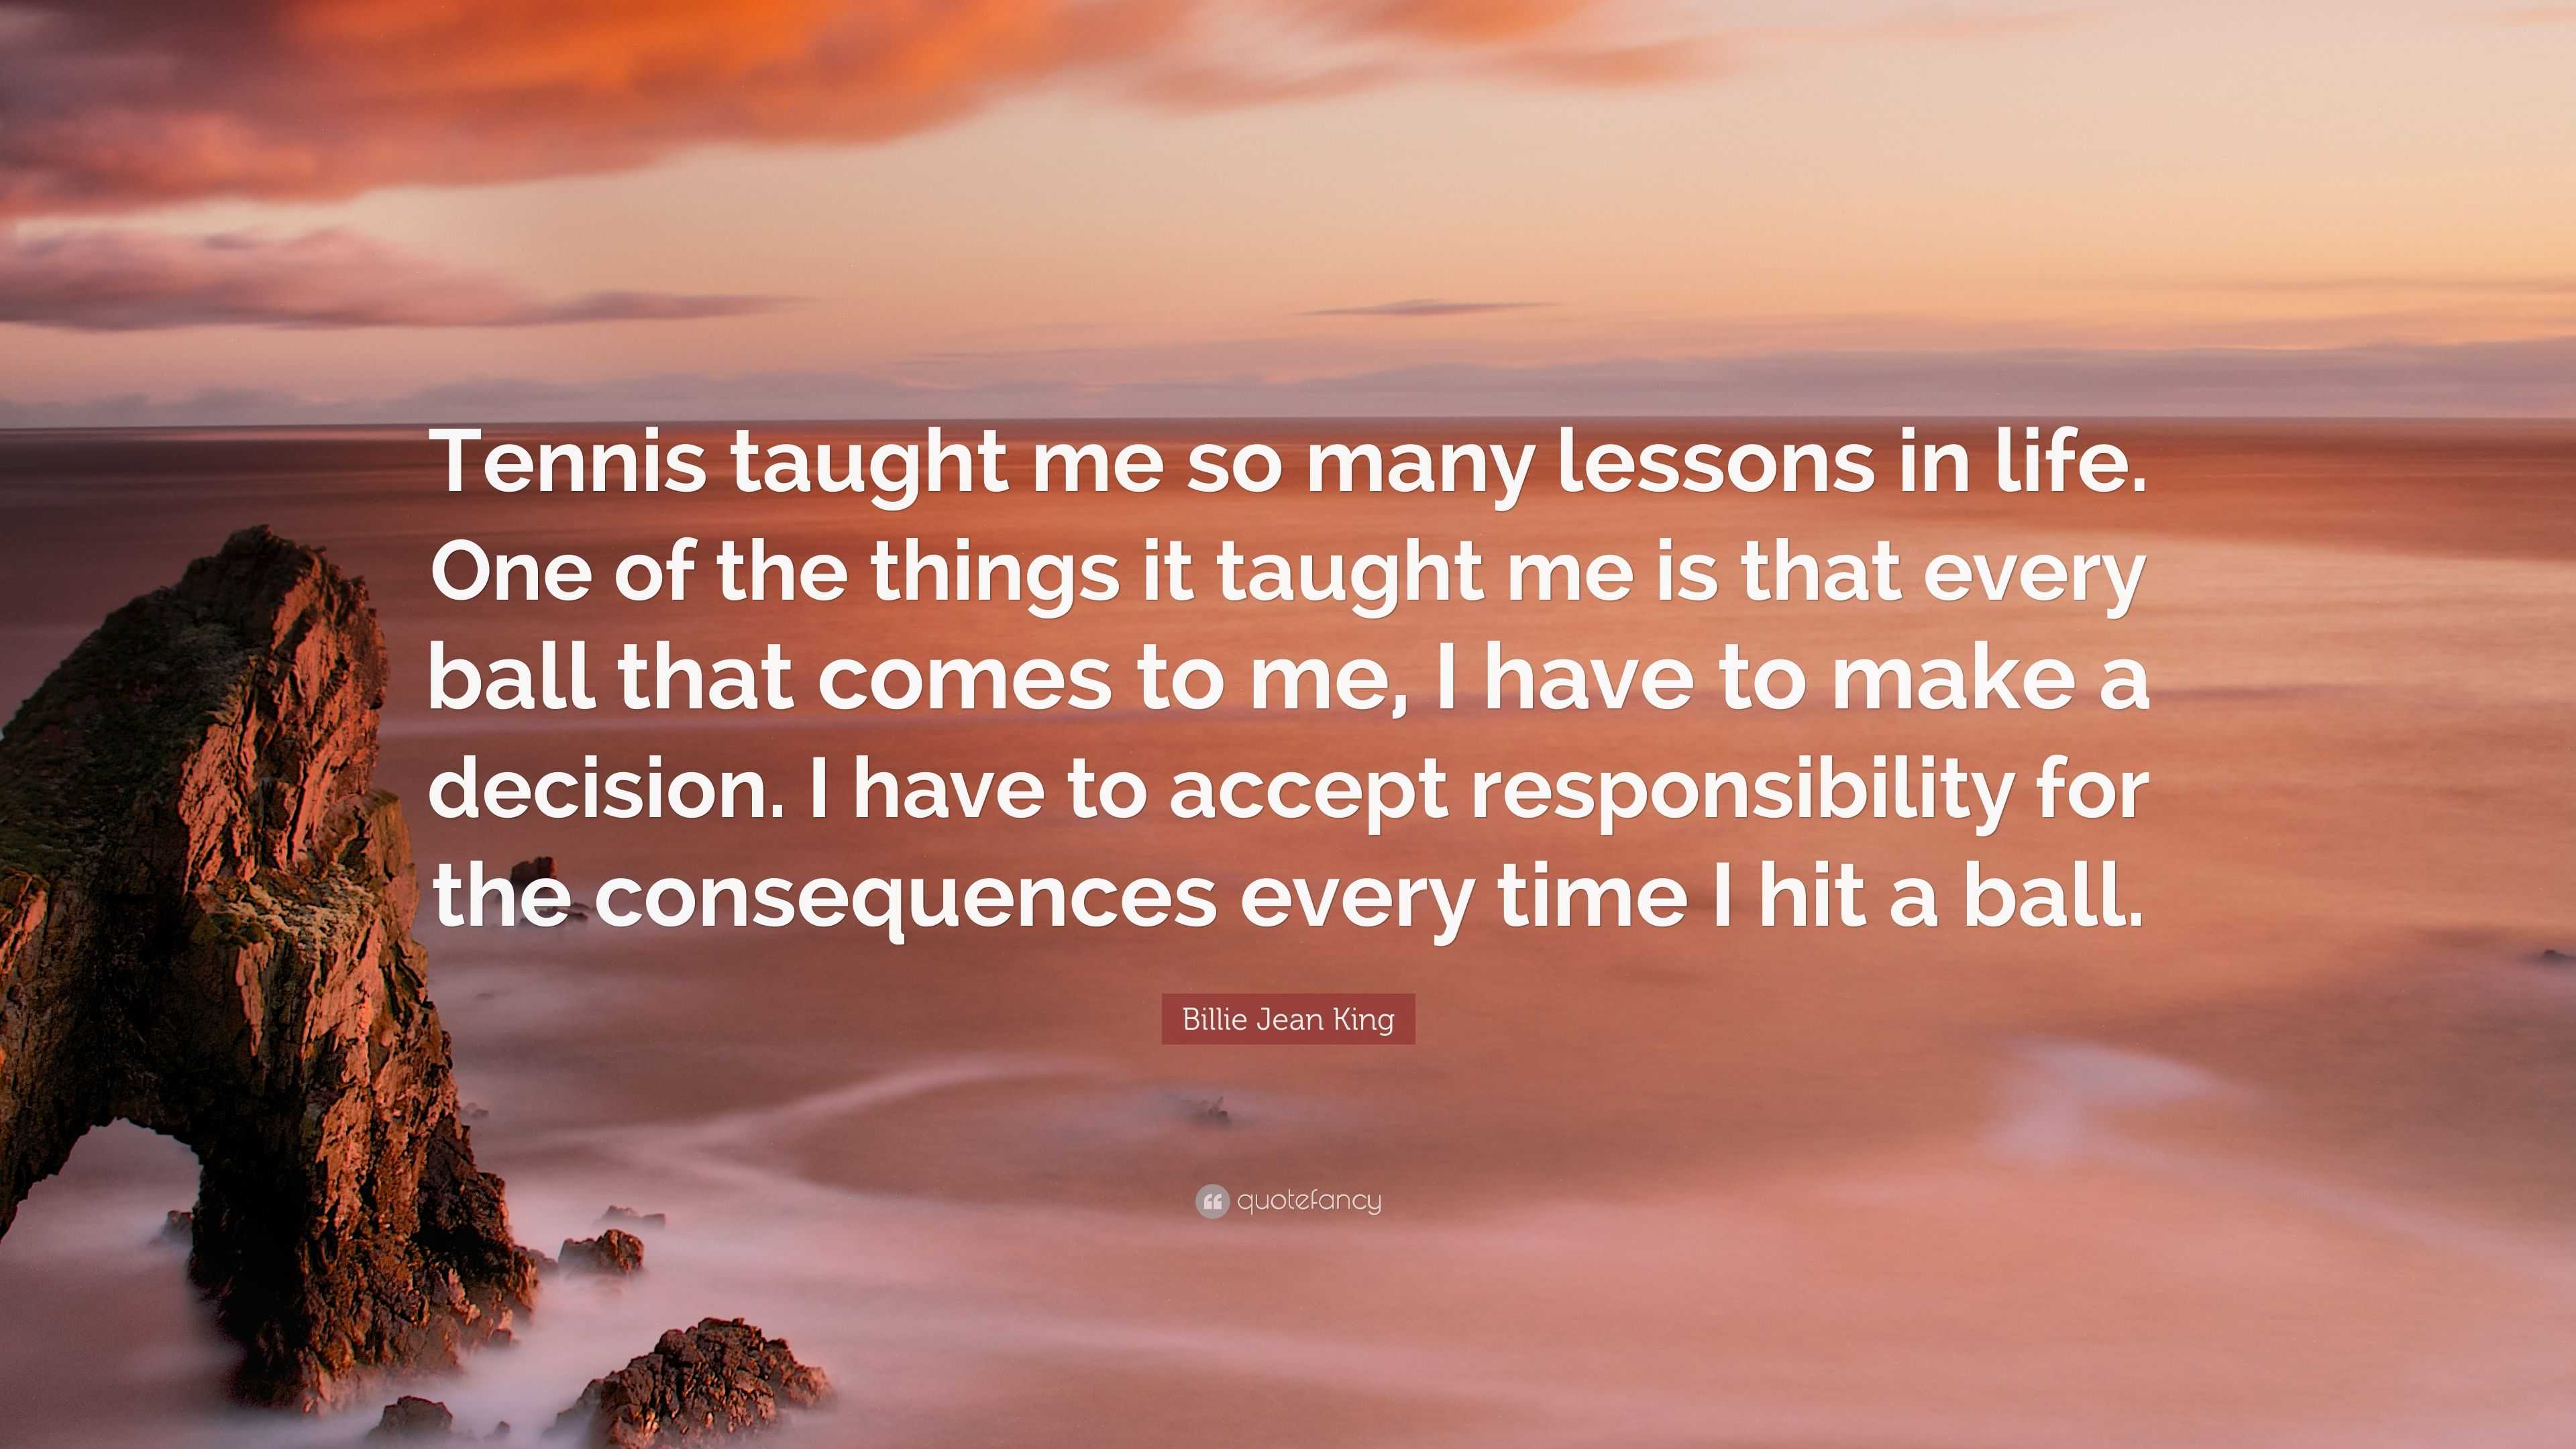 life taught me lesson quotes billie jean king quote u201ctennis taught me so many lessons in life